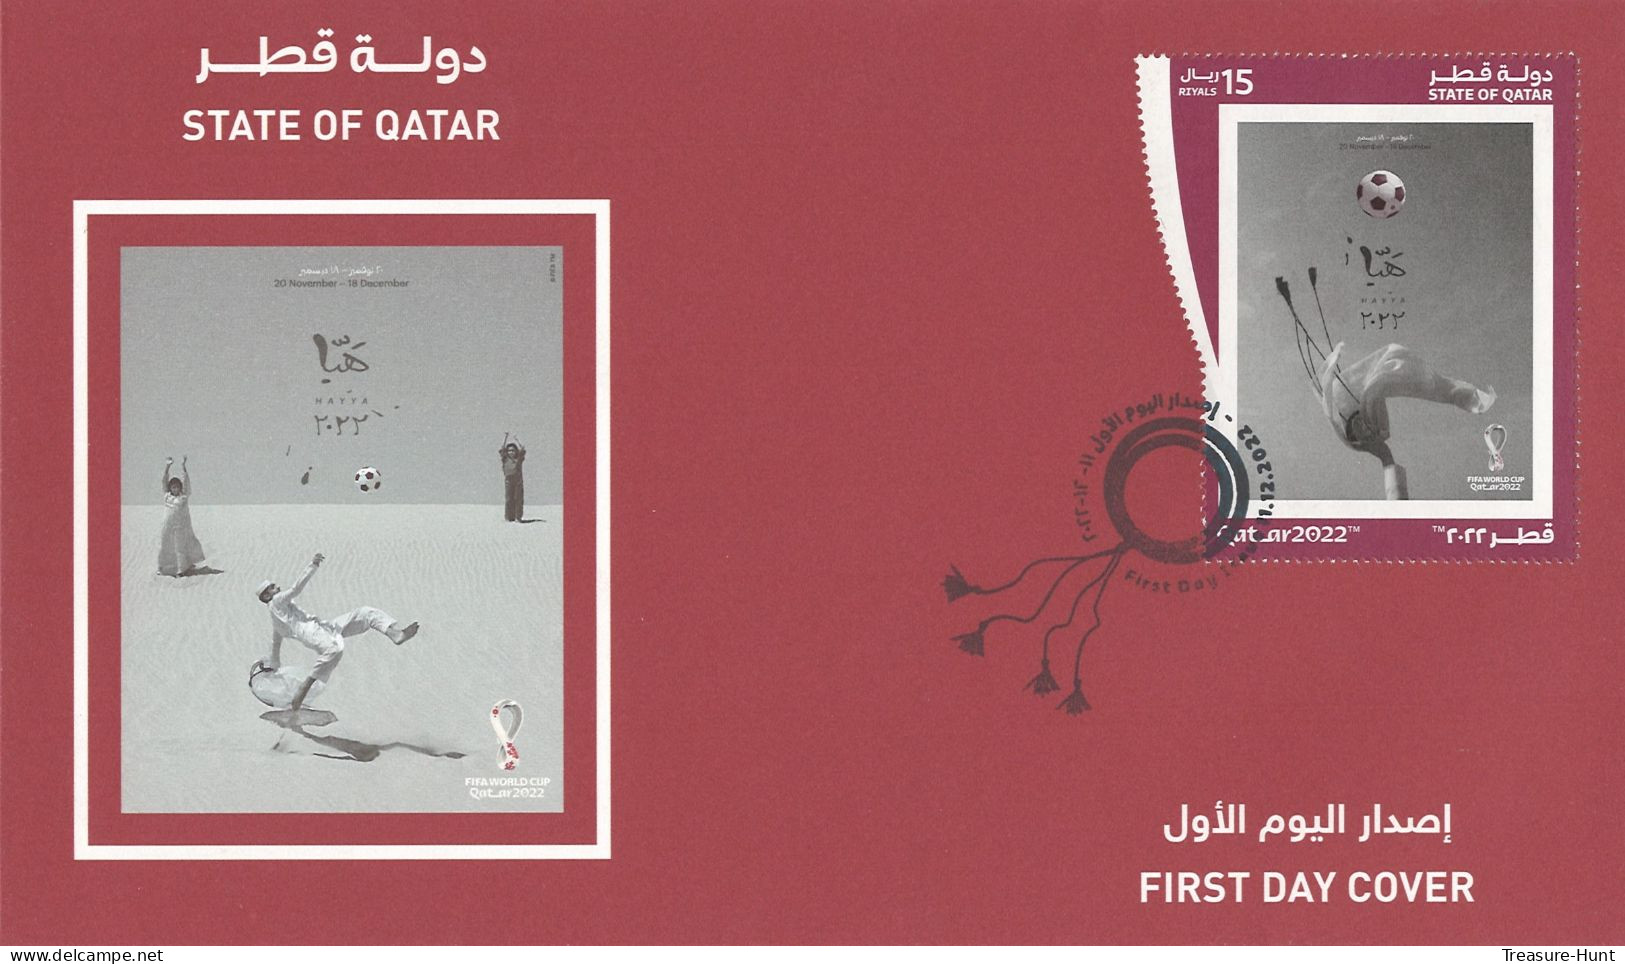 Complete Set of First Day Covers - QATAR 2022 FIFA World Cup Soccer Football Championship - 11 Stamps Sets, 15 FDC's